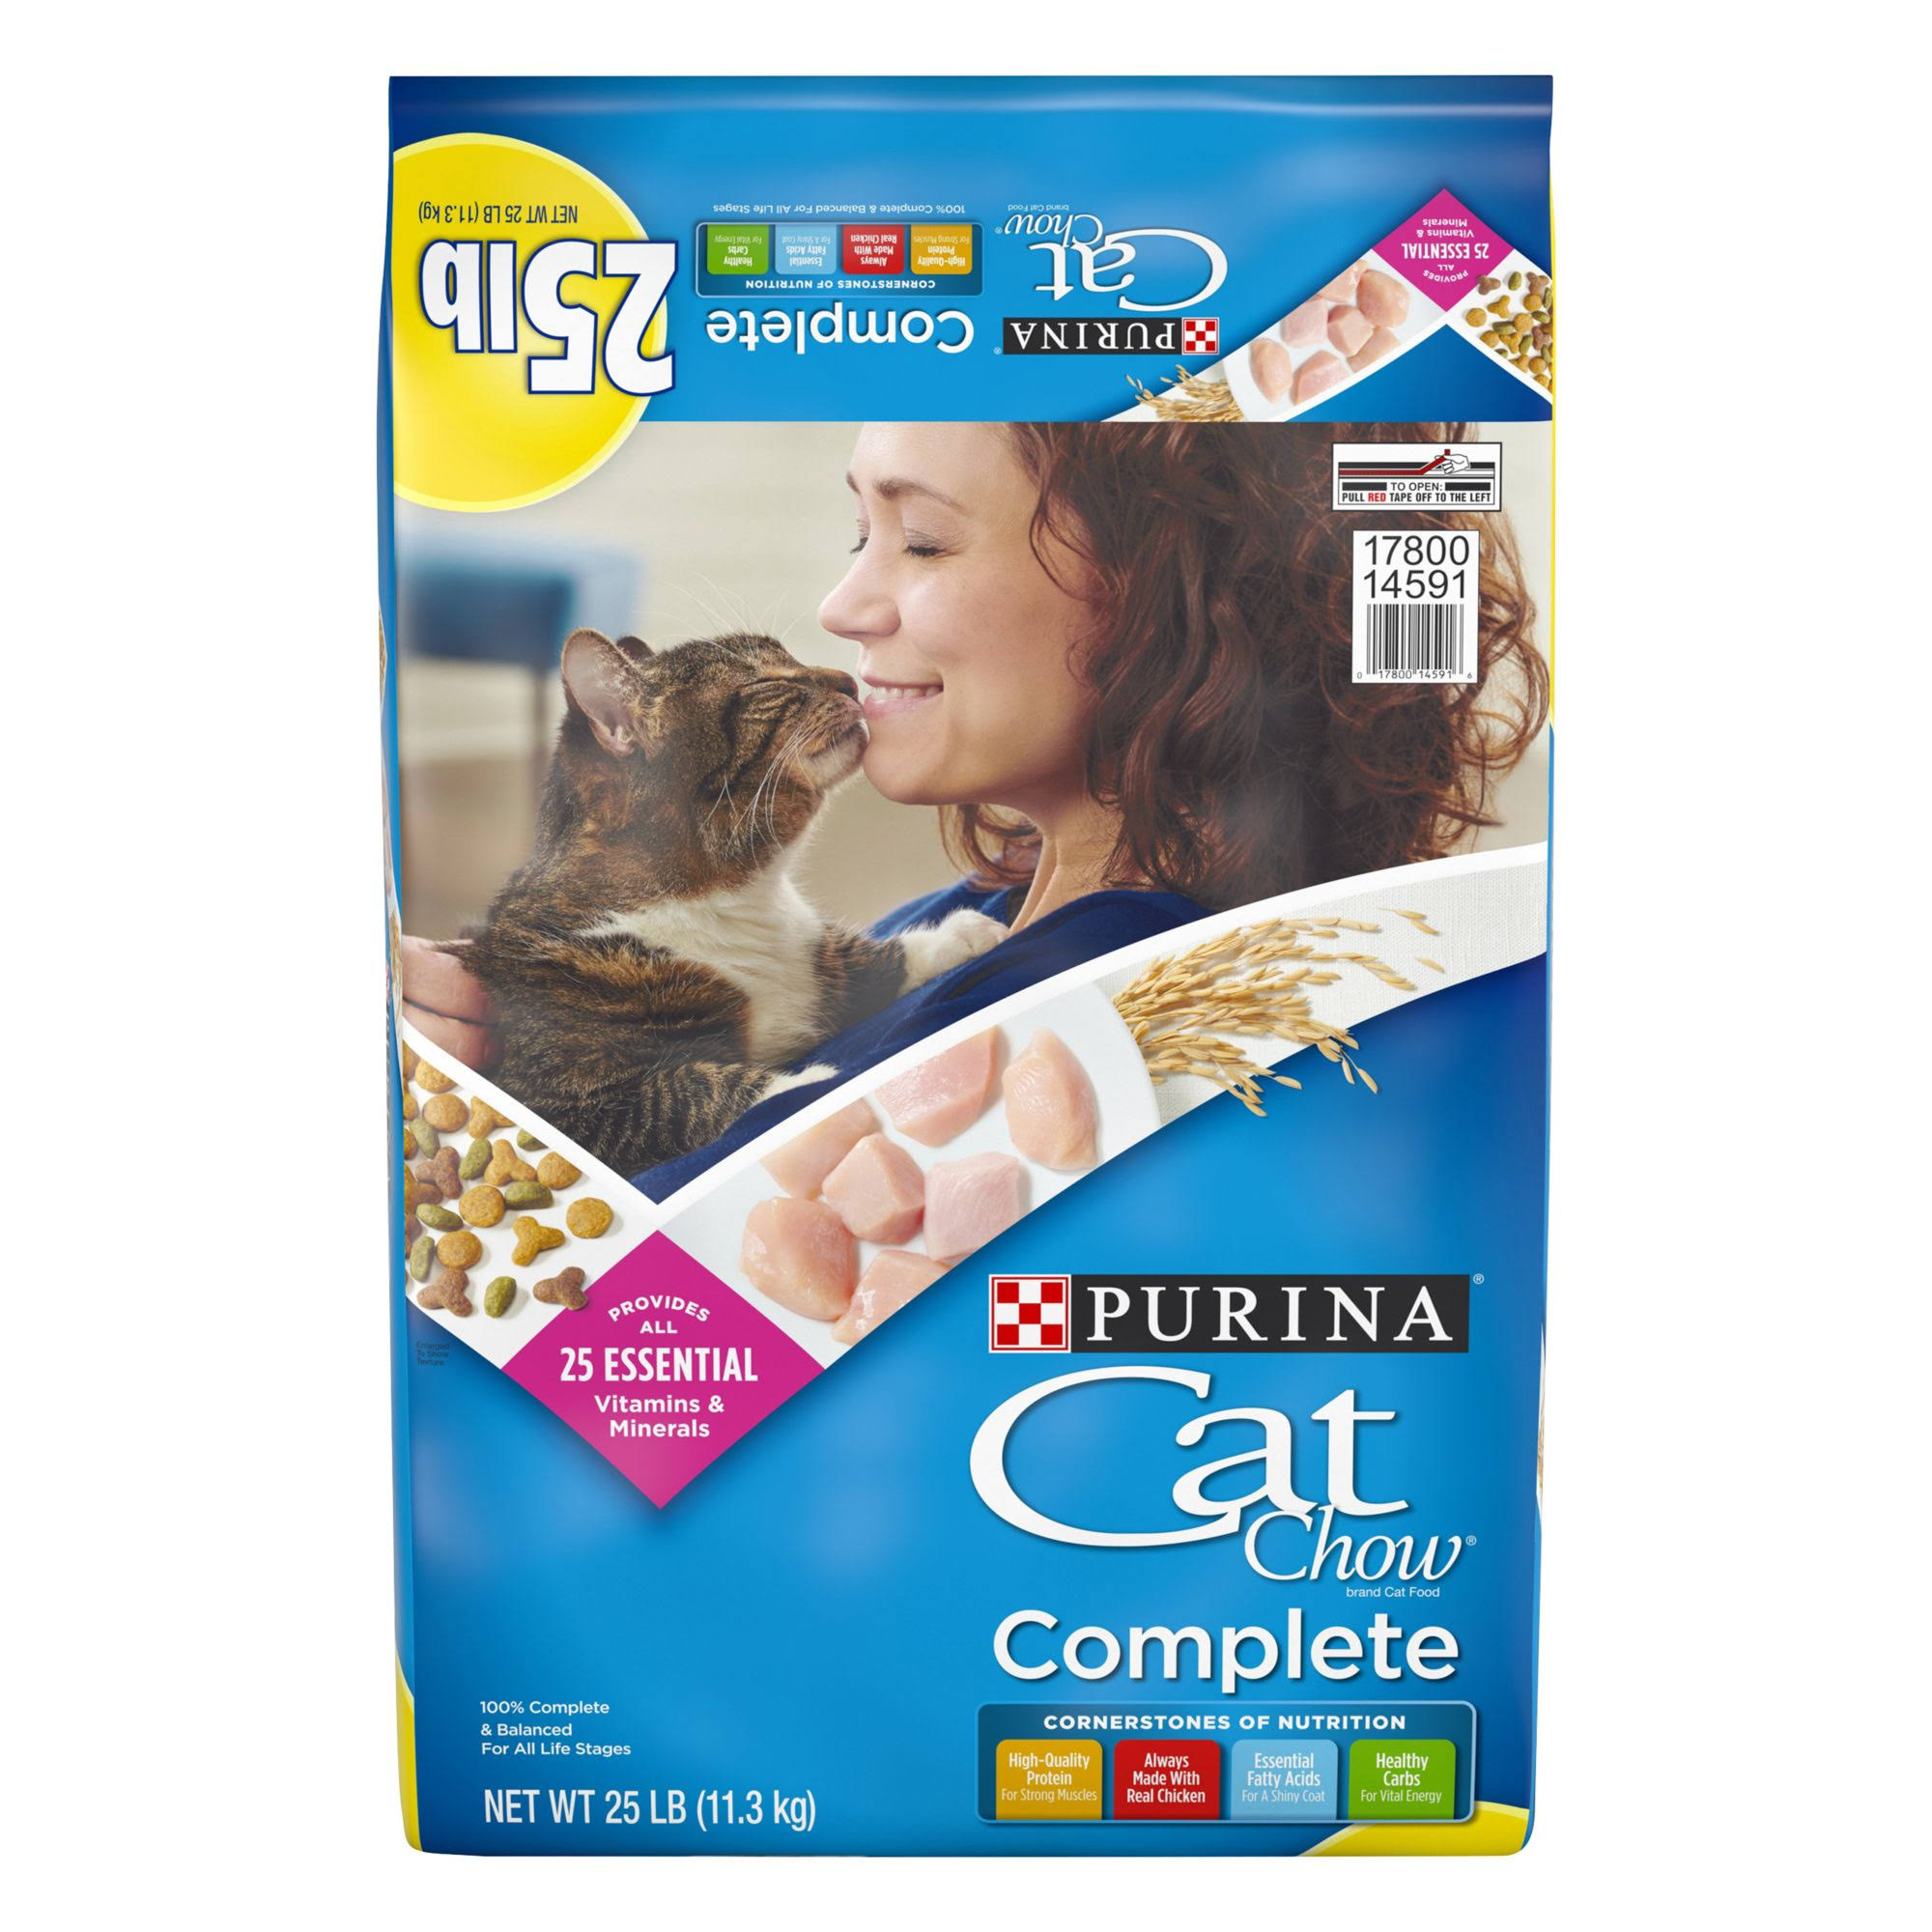 Purina Complete Cat Chow - Small, 25lbs